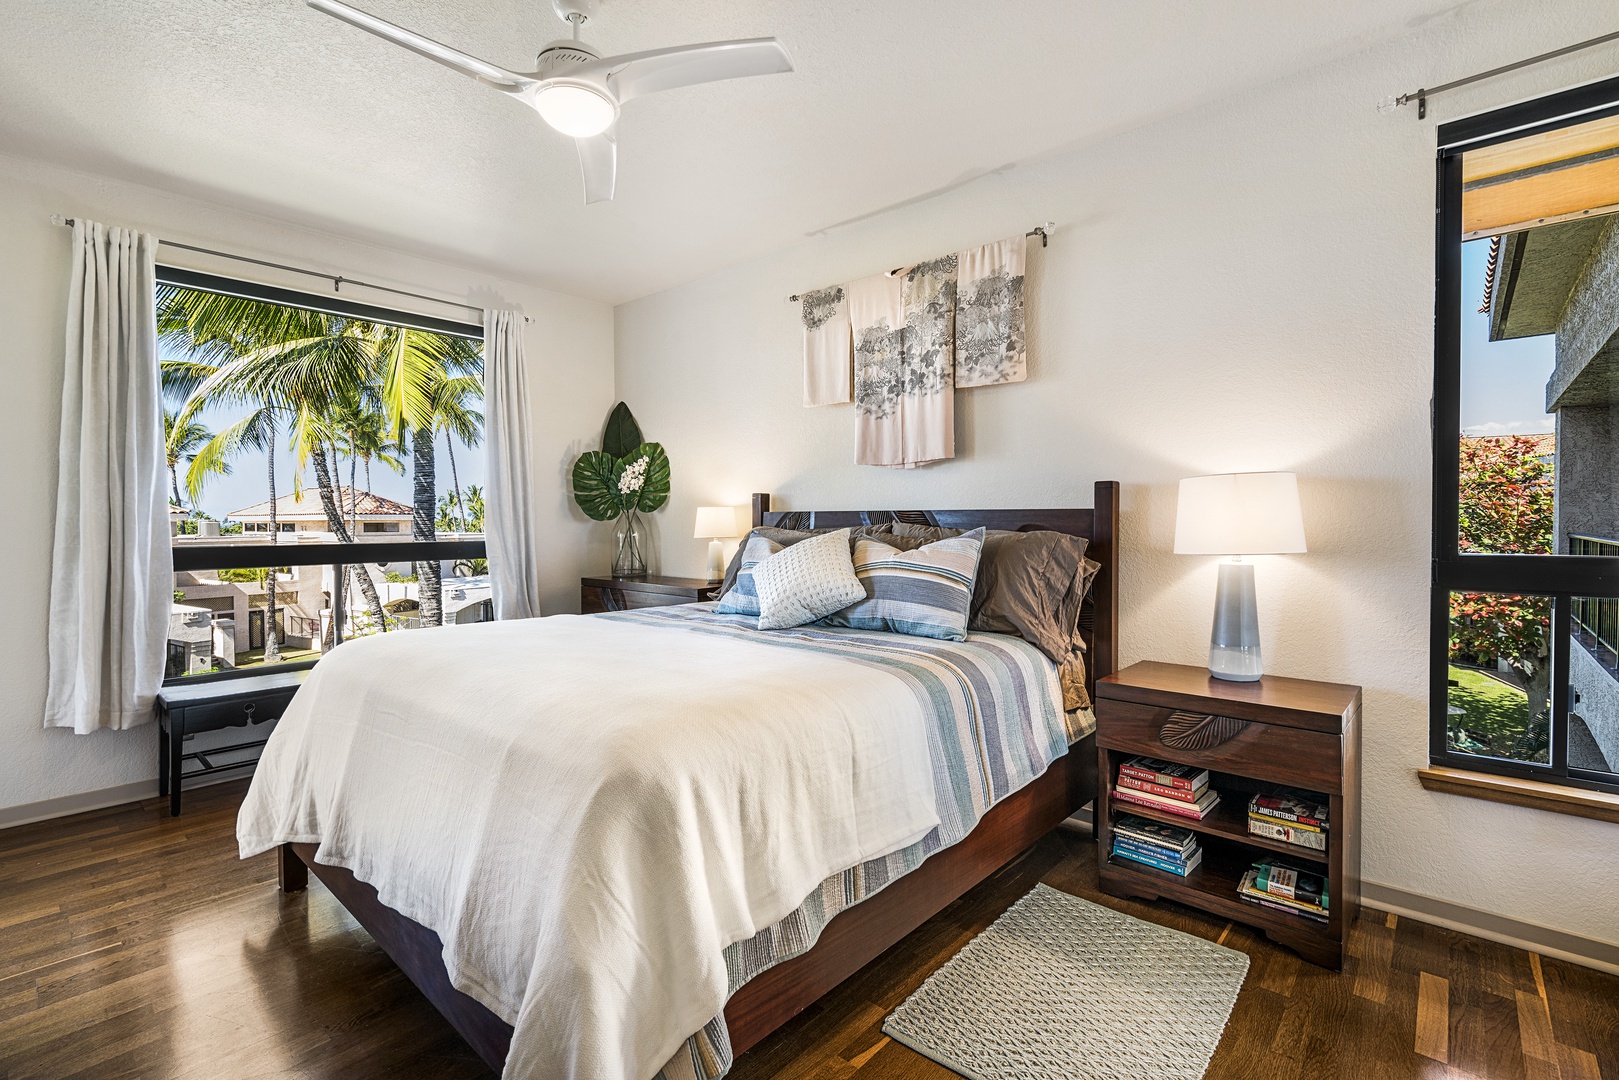 Waikoloa Vacation Rentals, Shores at Waikoloa Beach Resort 332 - Primary bedroom equipped with Queen bed